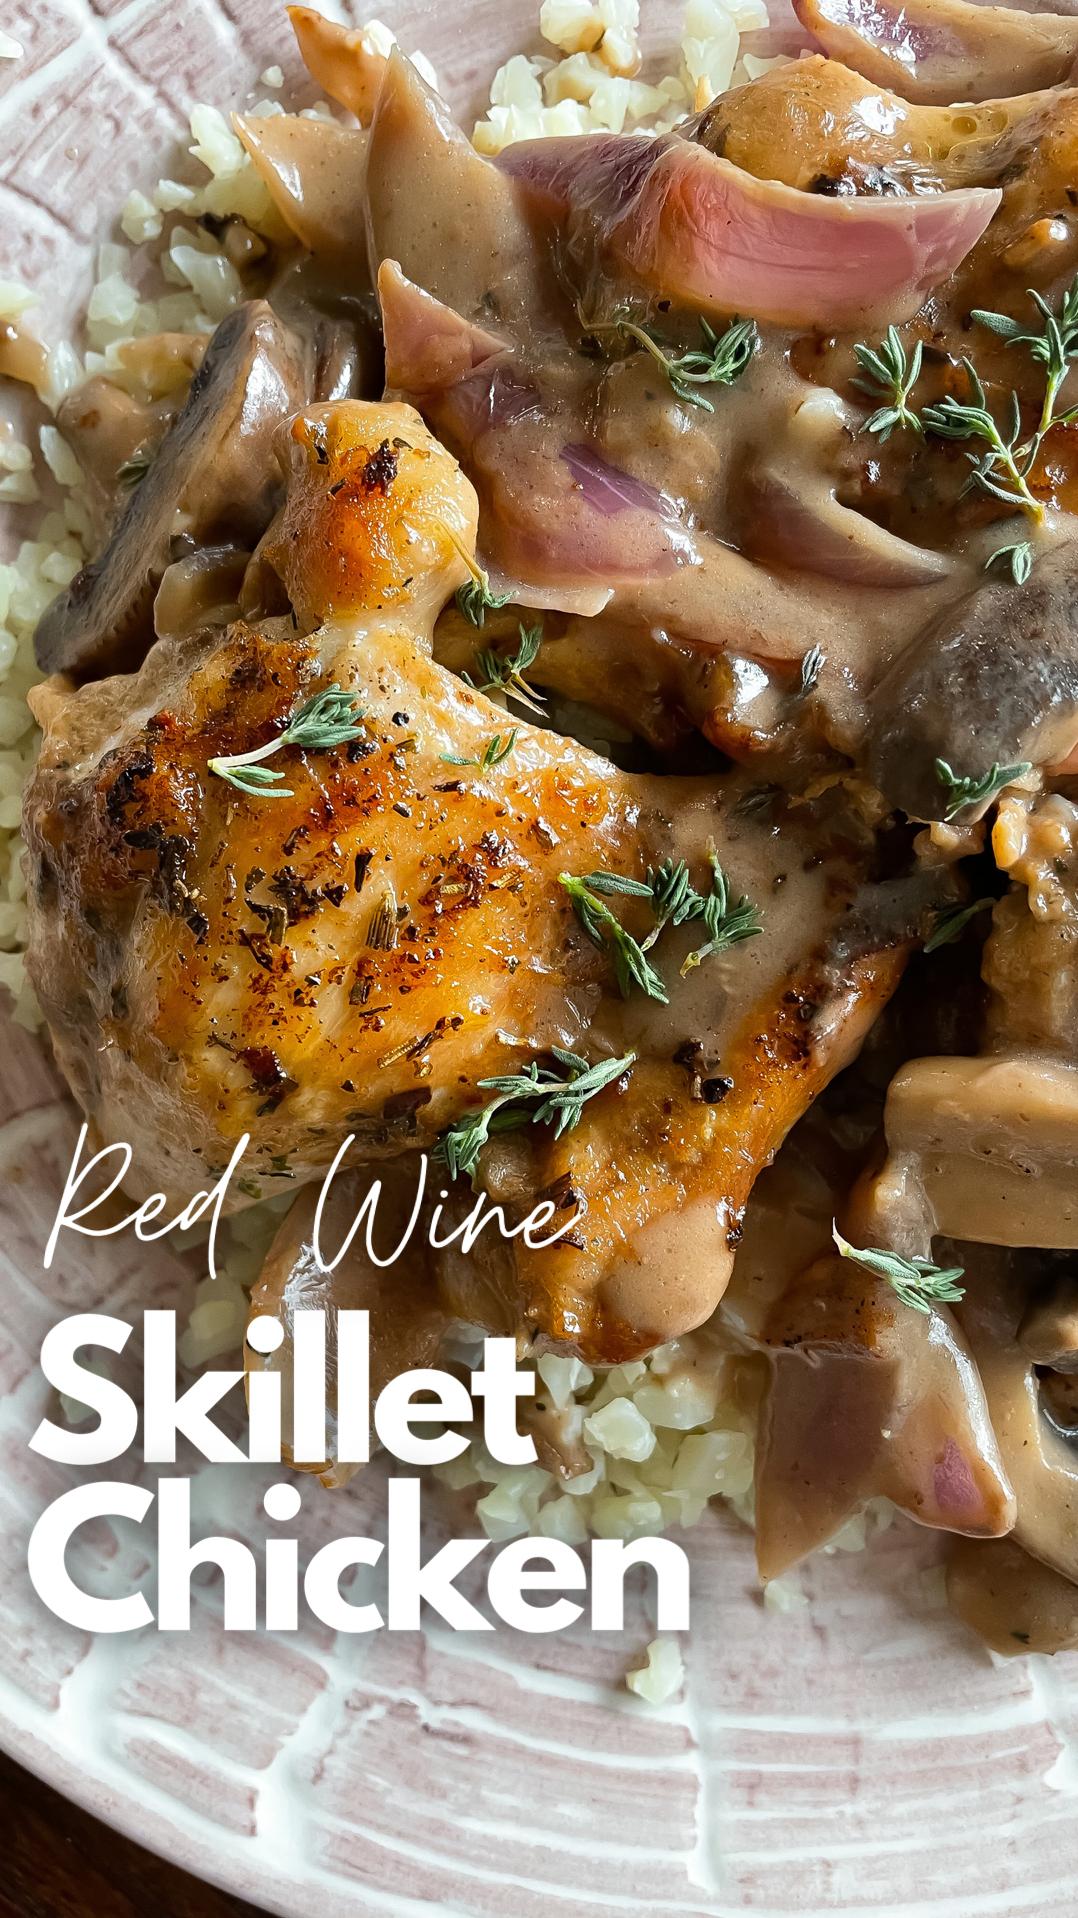  If you’re looking for a hearty meal to indulge in on a cozy night in, this chicken in olive-red wine sauce is just the ticket.